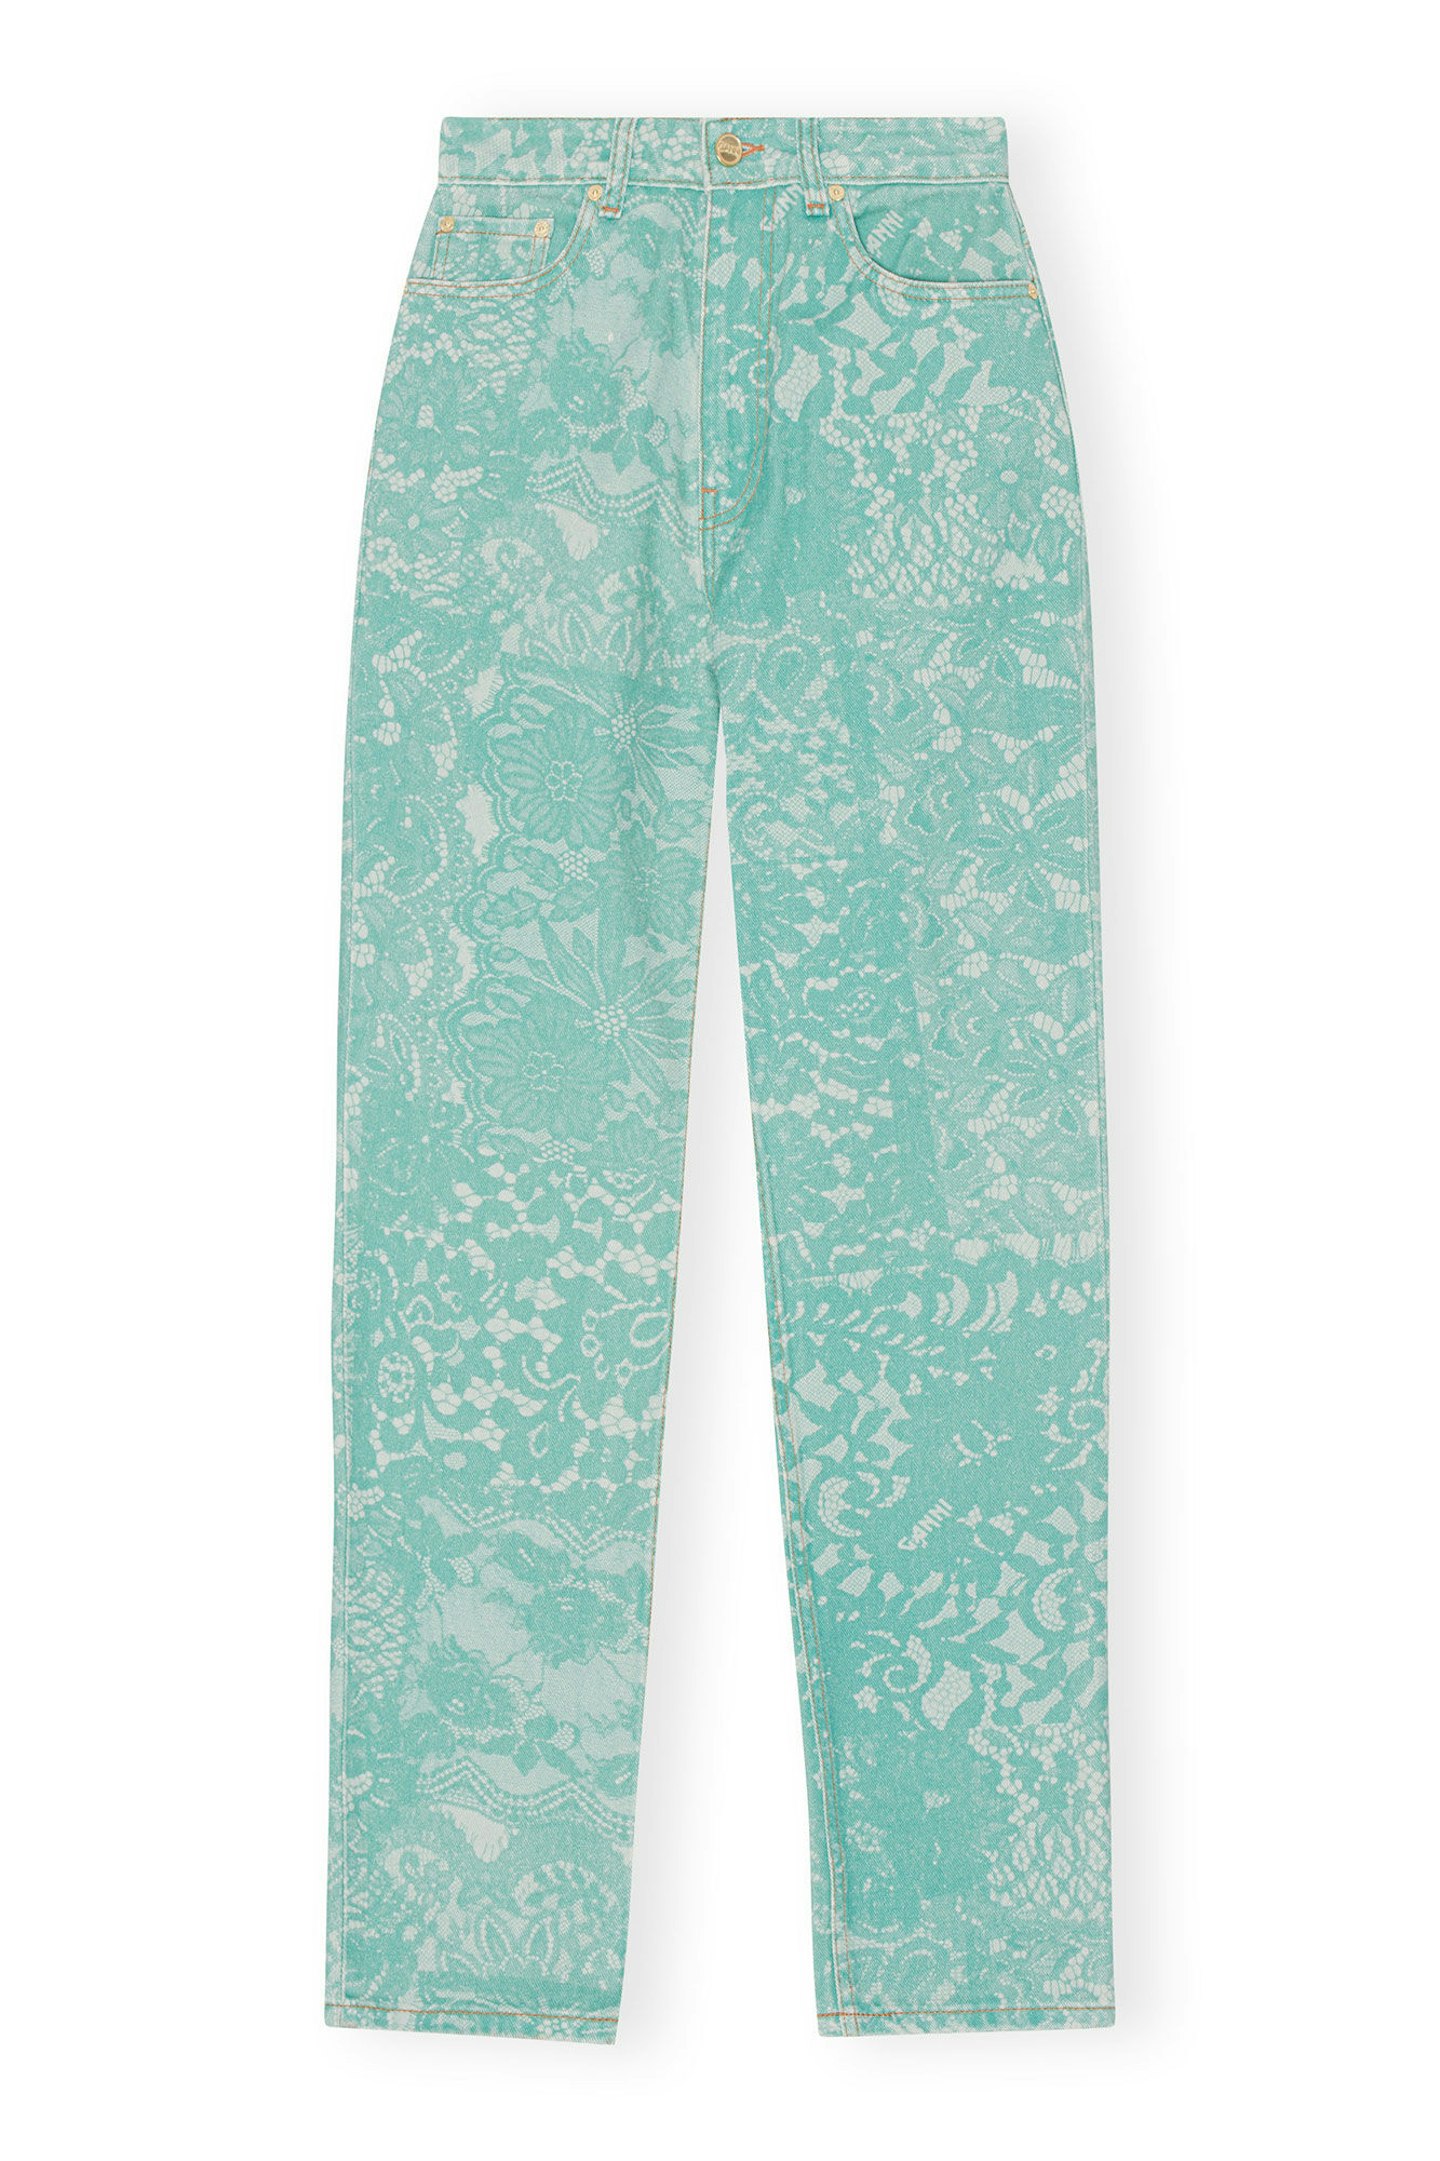 Ganni, Lace-Printed Swigy Jeans